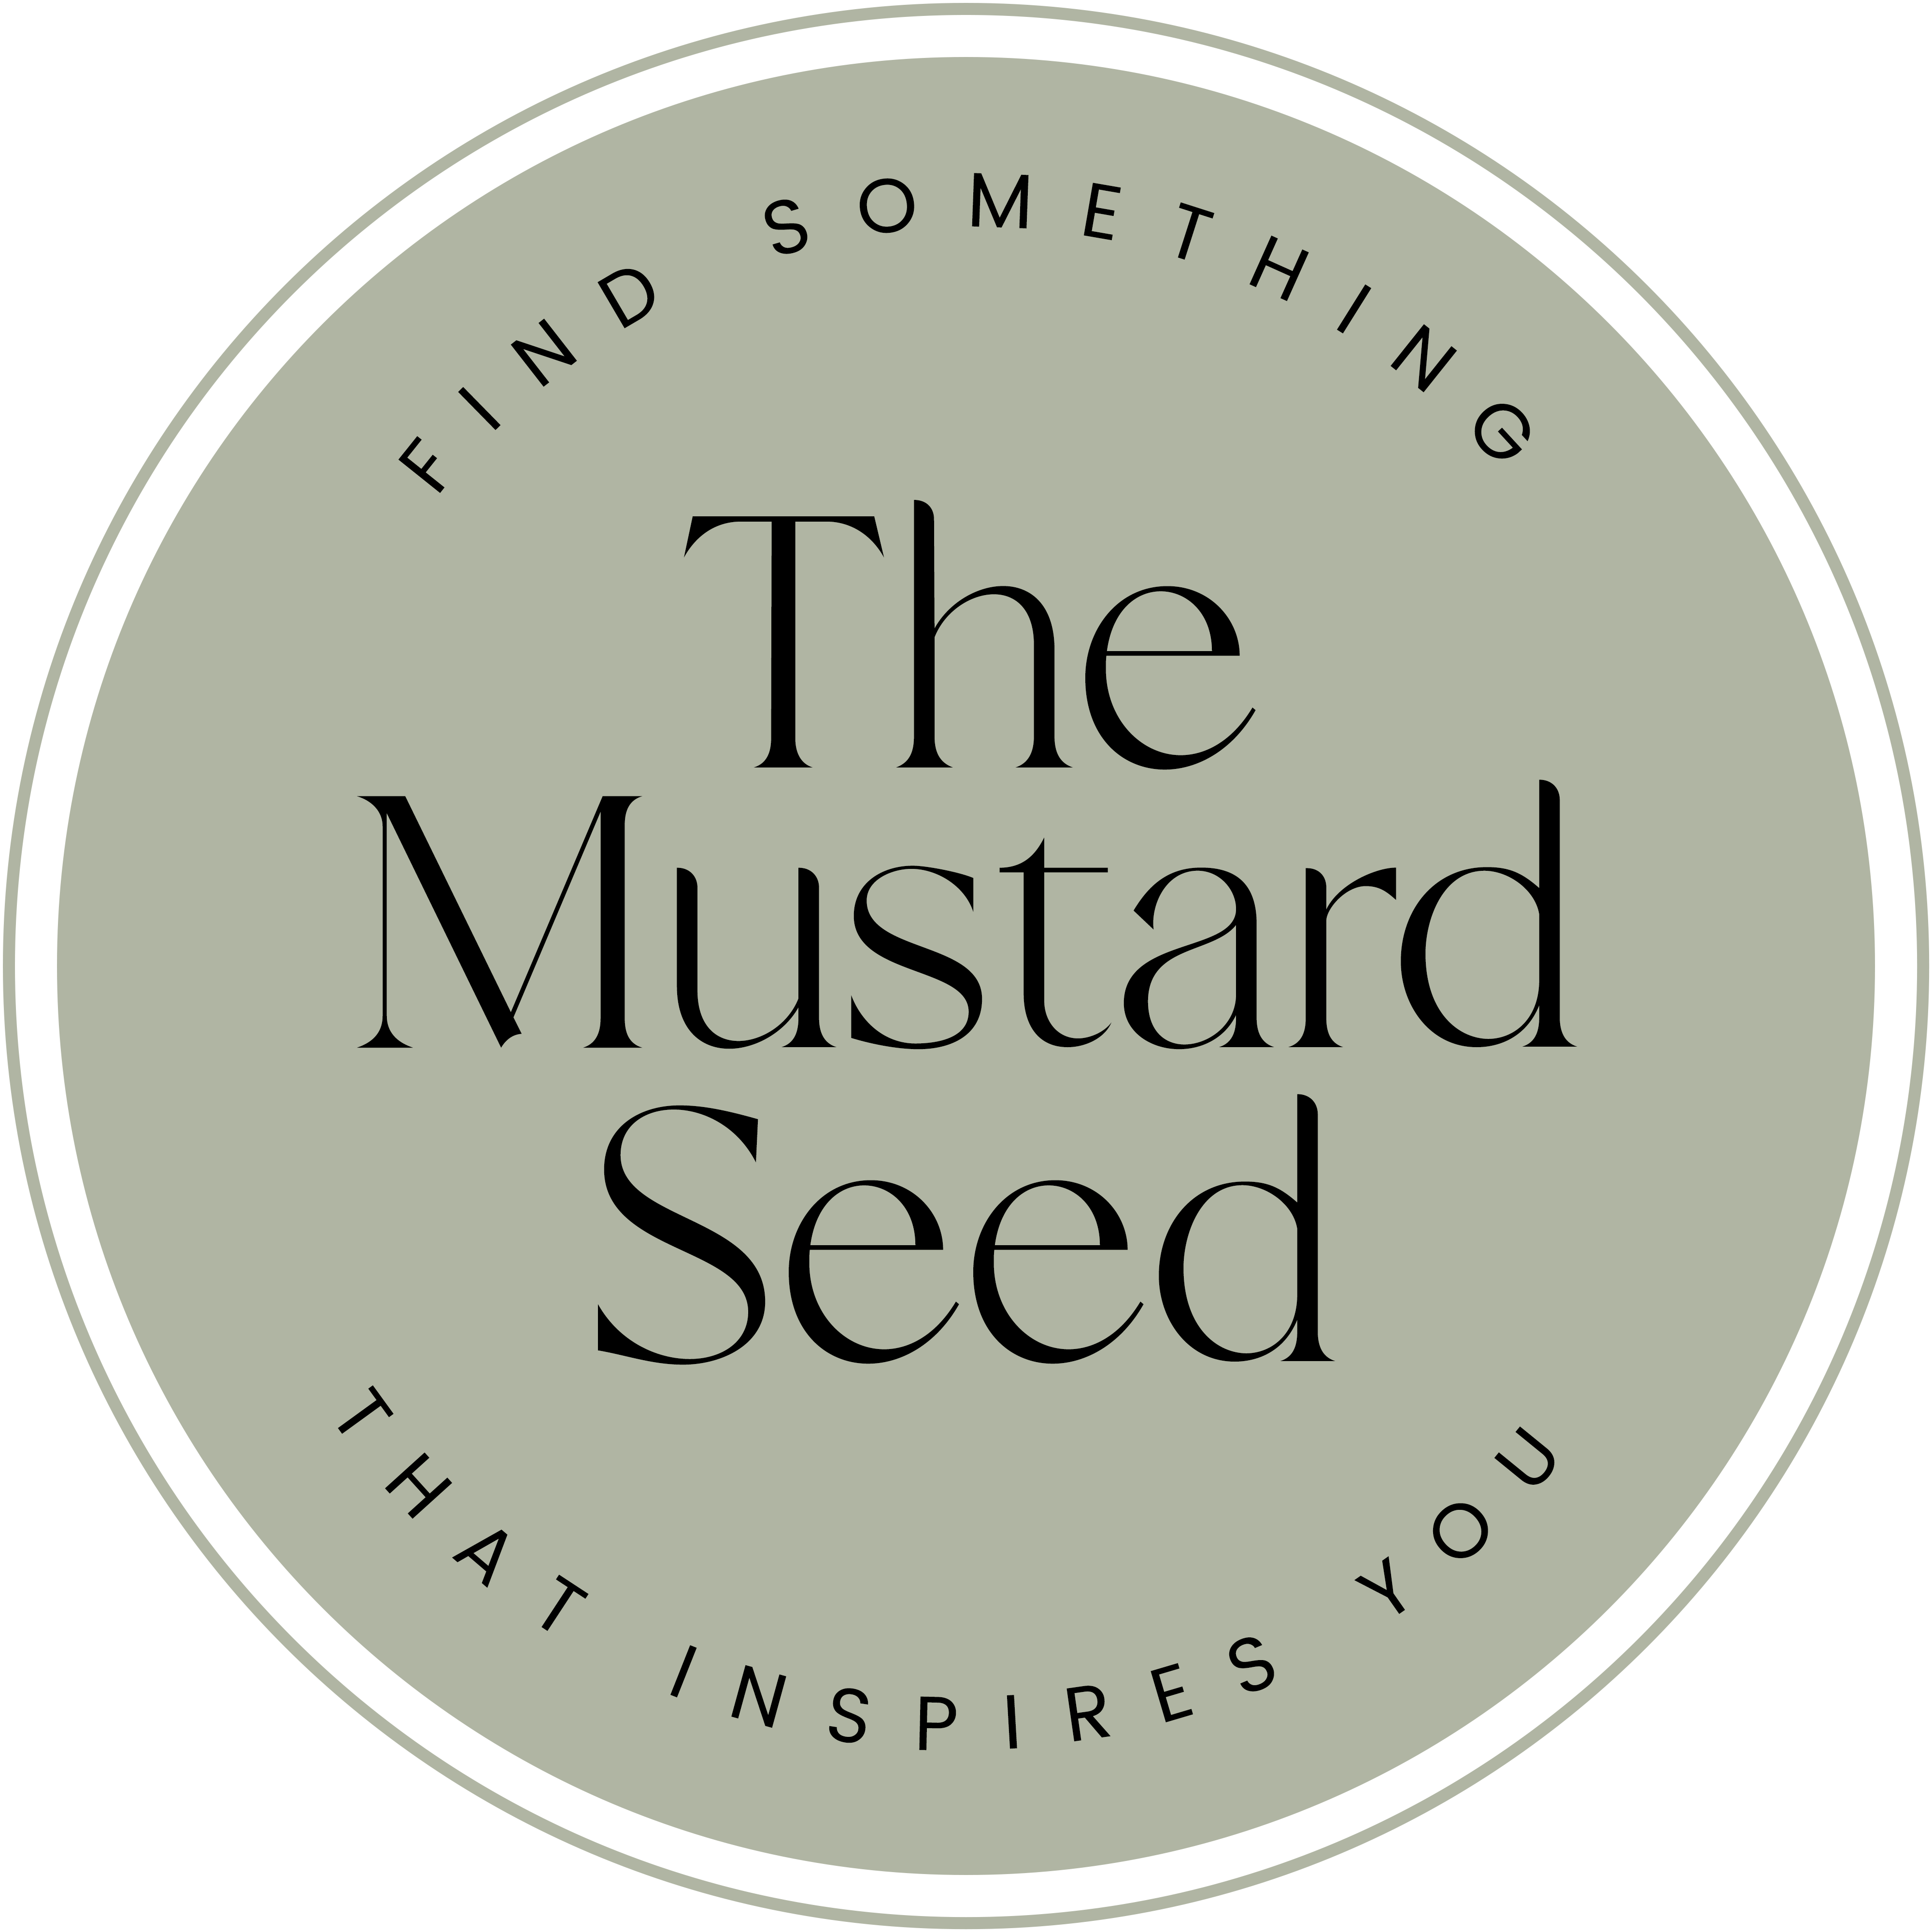 Contact The Mustard Seed